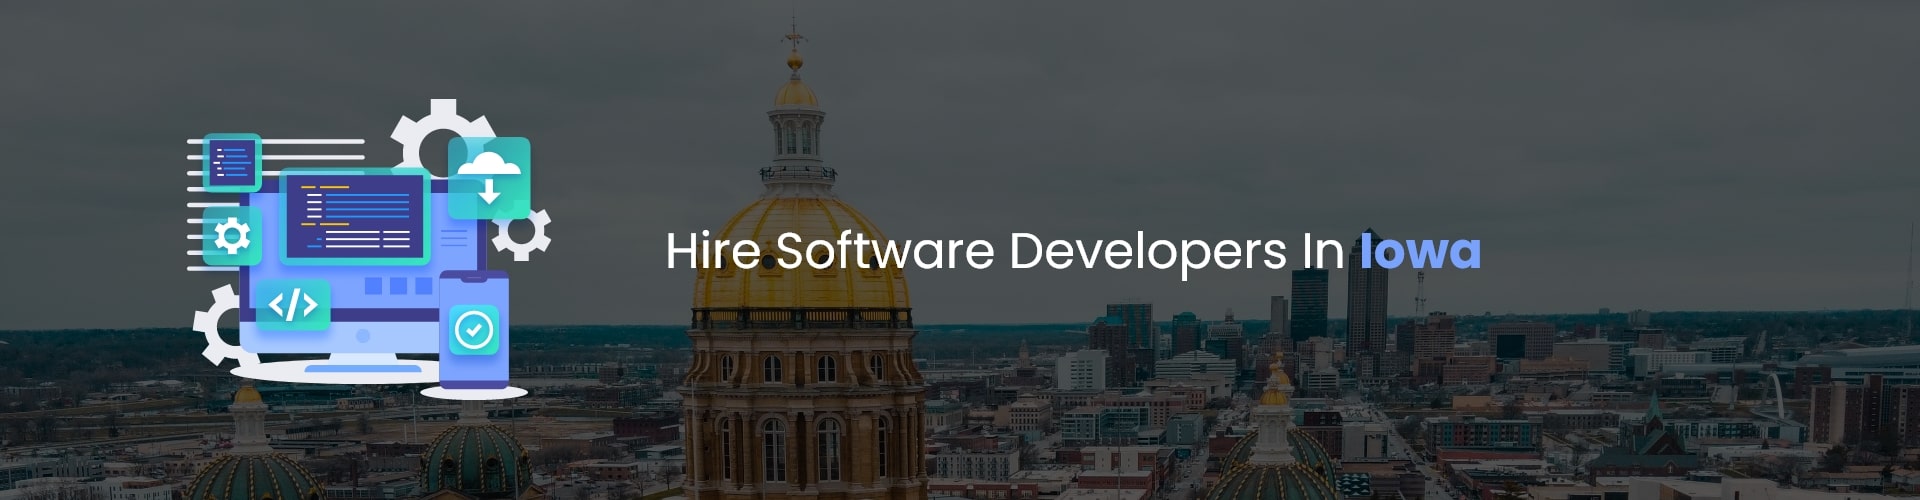 hire software developers in iowa